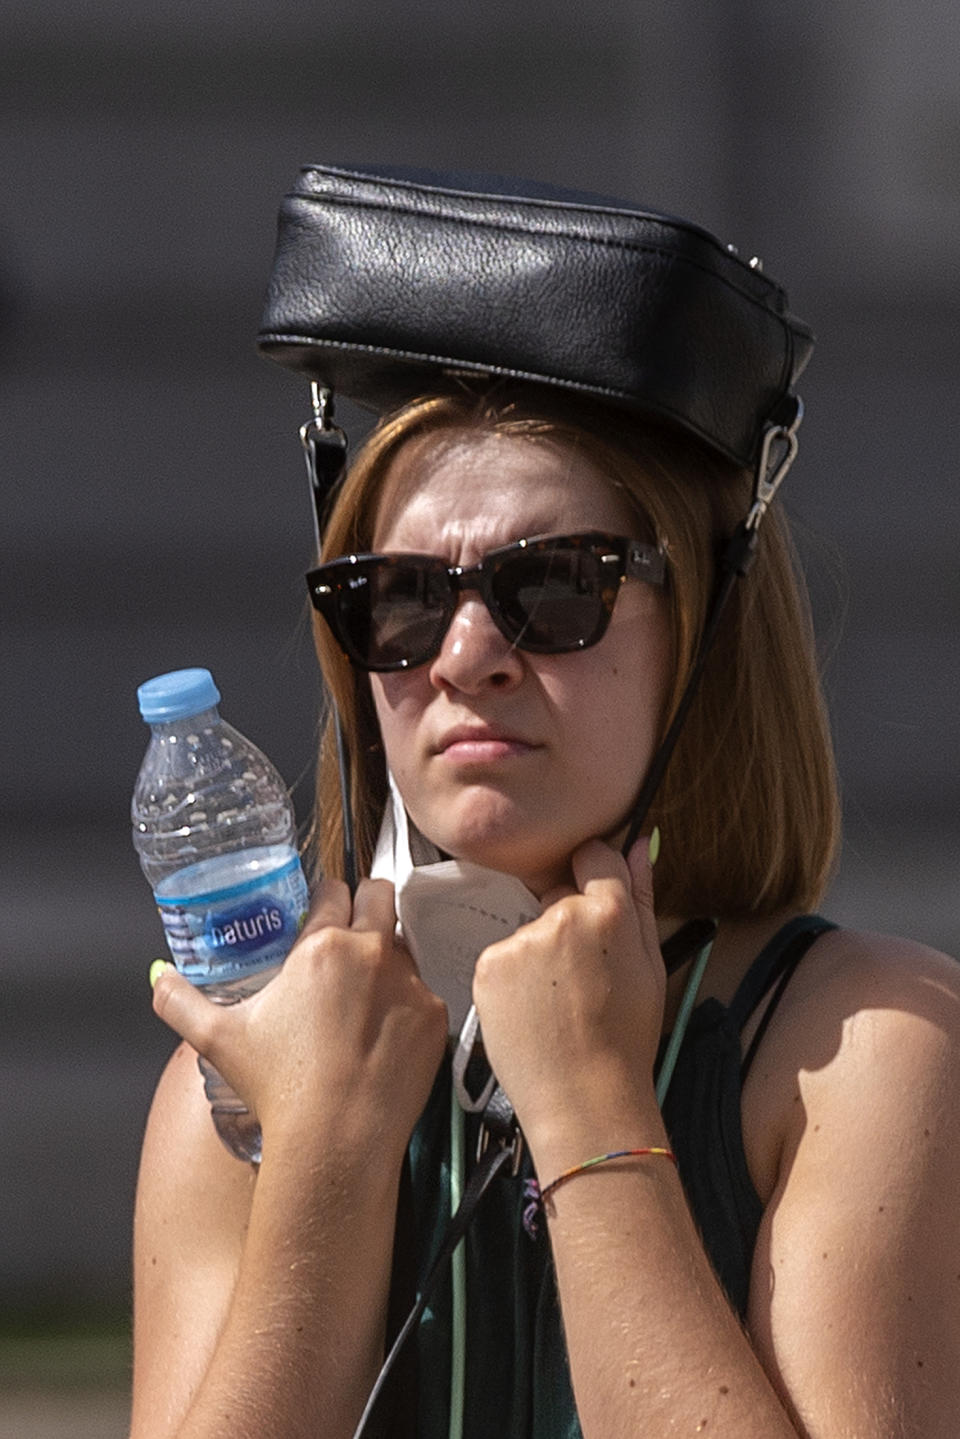 A woman tries to protect herself from the sun with her handbag on her head during a heatwave in Madrid, Spain, Friday, Aug. 13, 2021. Stifling heat is gripping much of Spain and Southern Europe, and forecasters say worse is expected to come. (AP Photo/Andrea Comas)